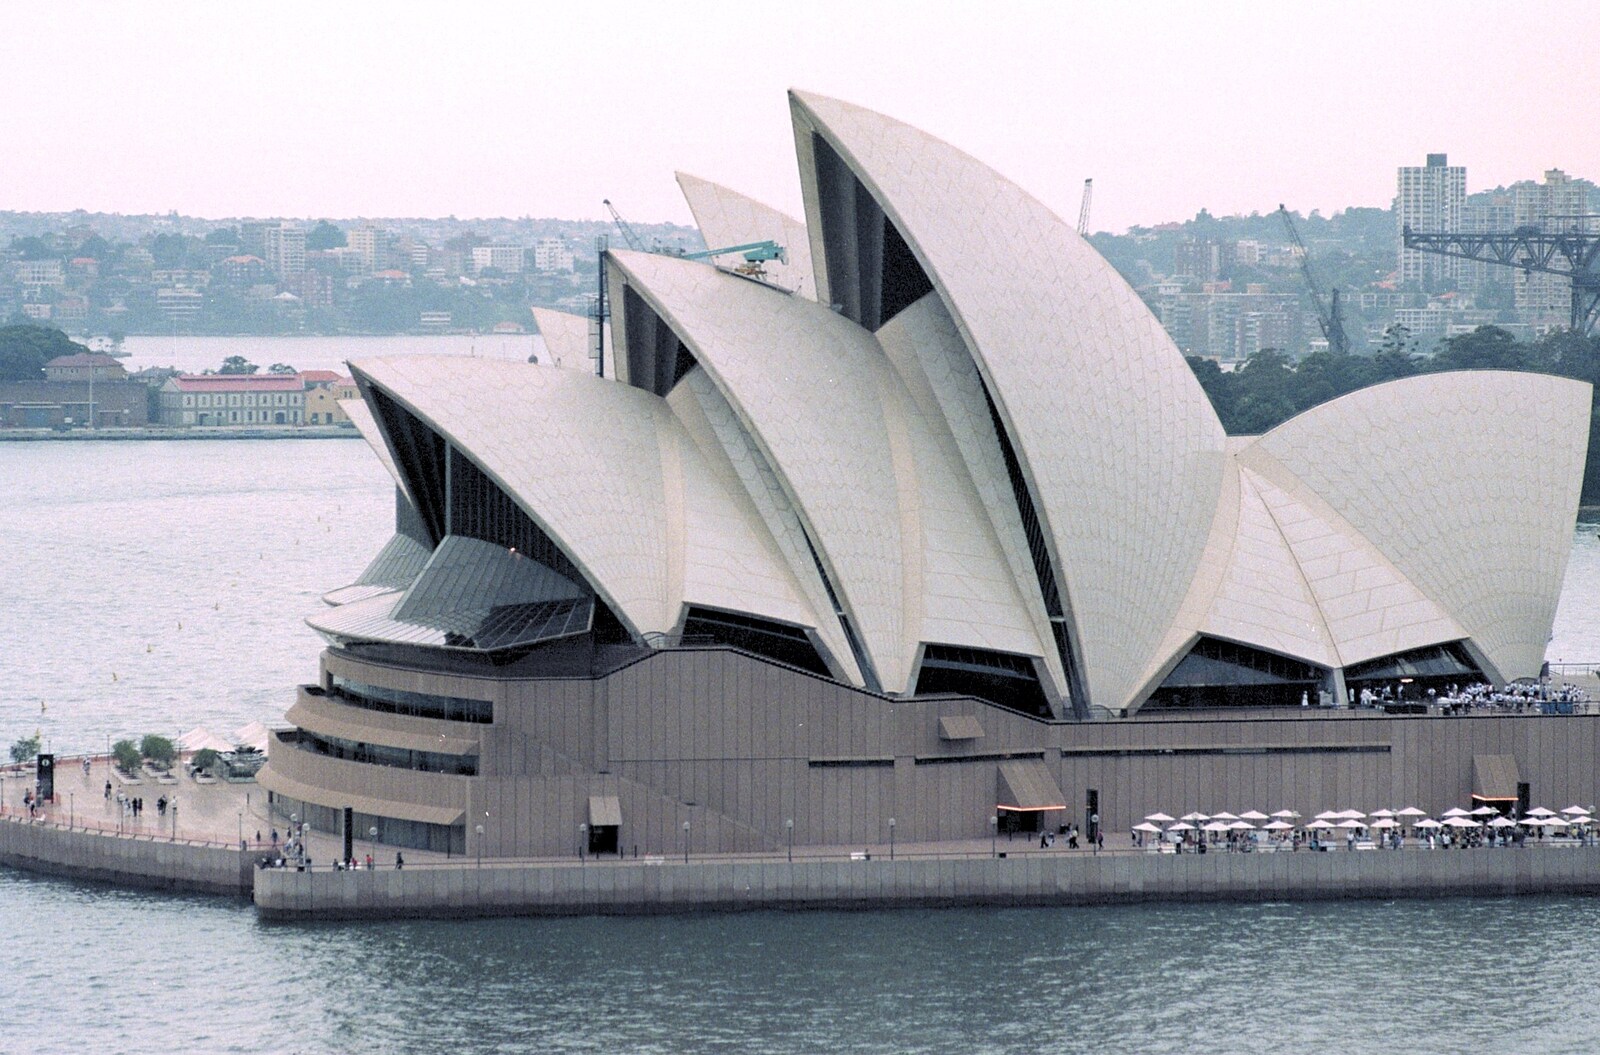 The Sydney Opera House from A Trip to the Blue Mountains, New South Wales, Australia - 12th April 2000